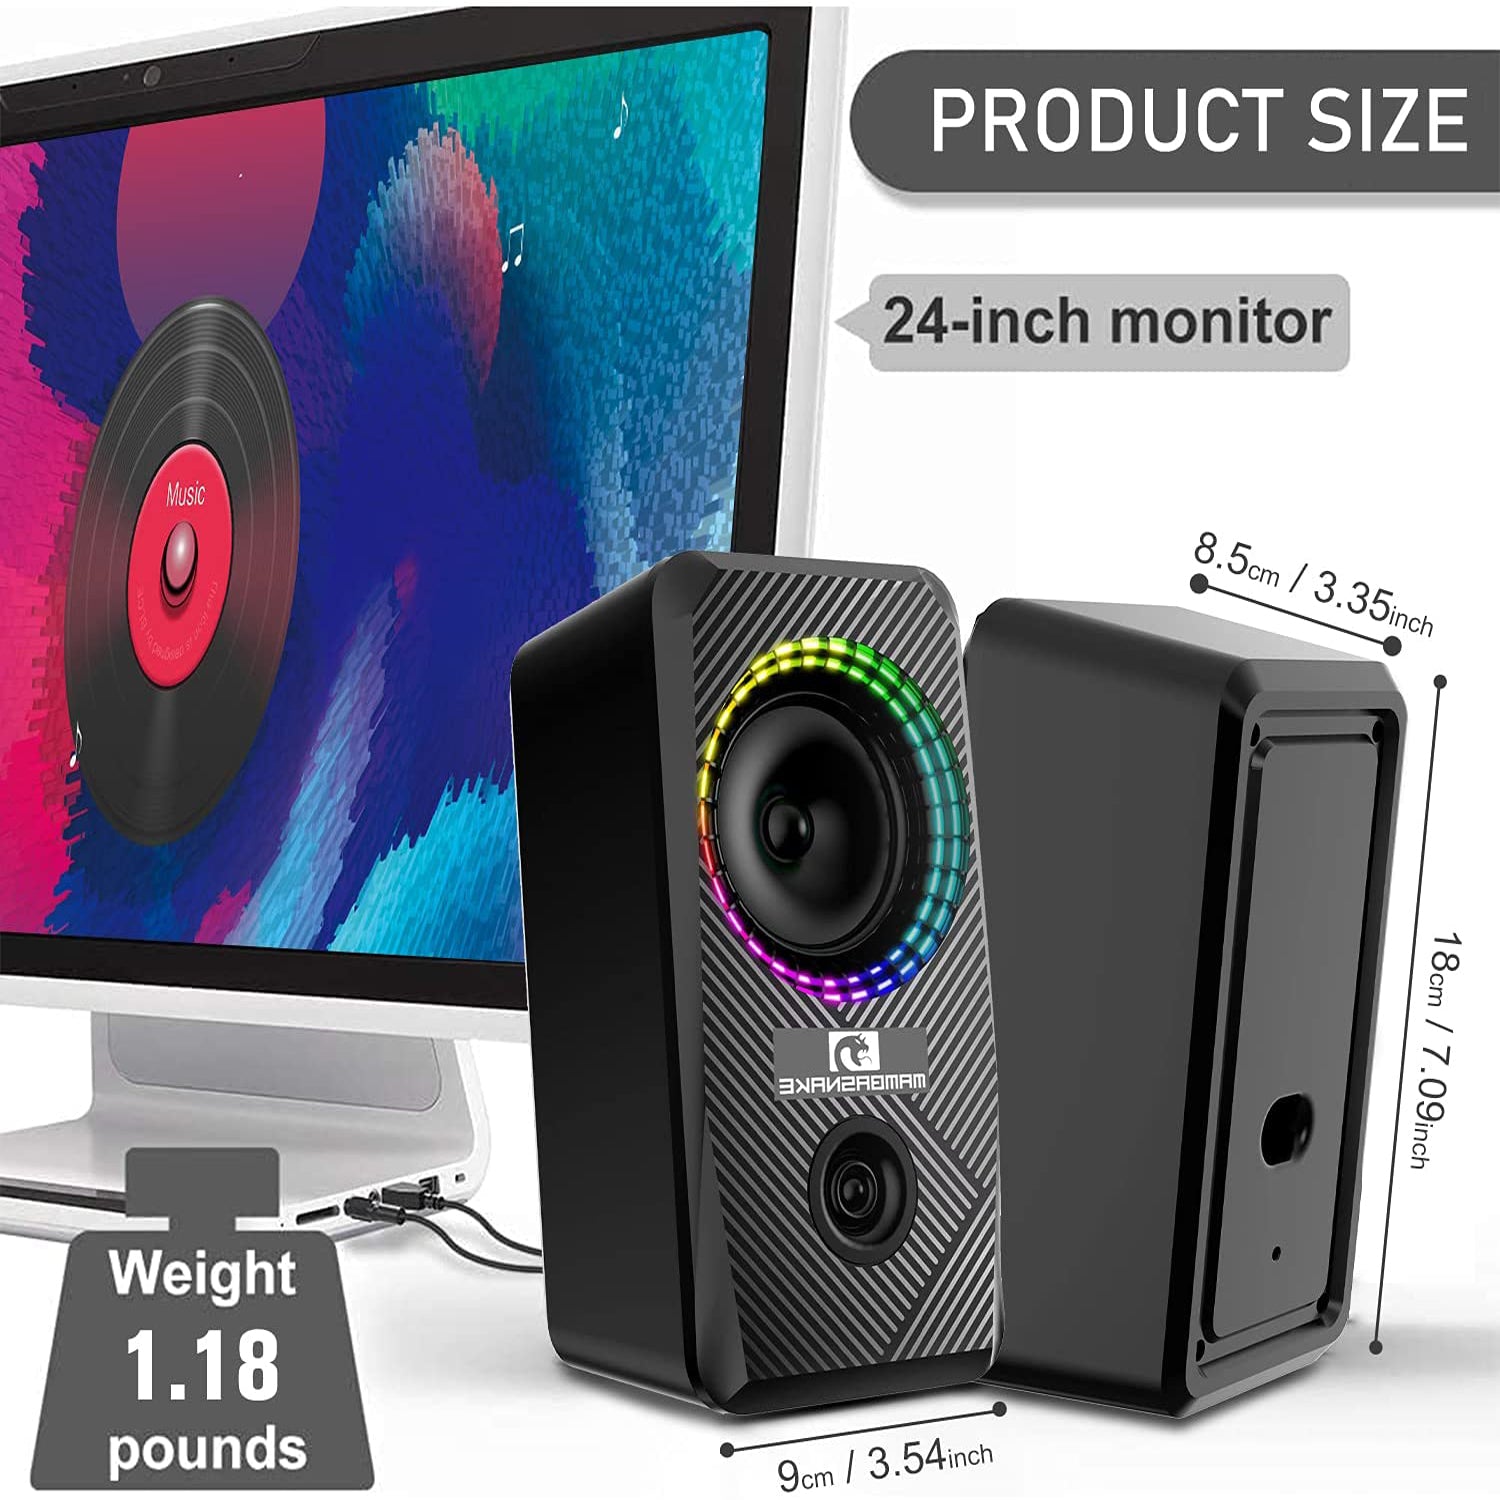 MAMBASNKAE CS-326Wired RGB Computer Speakers,2.0 Channel PC Stereo Speaker with 6 Colorful LED Modes